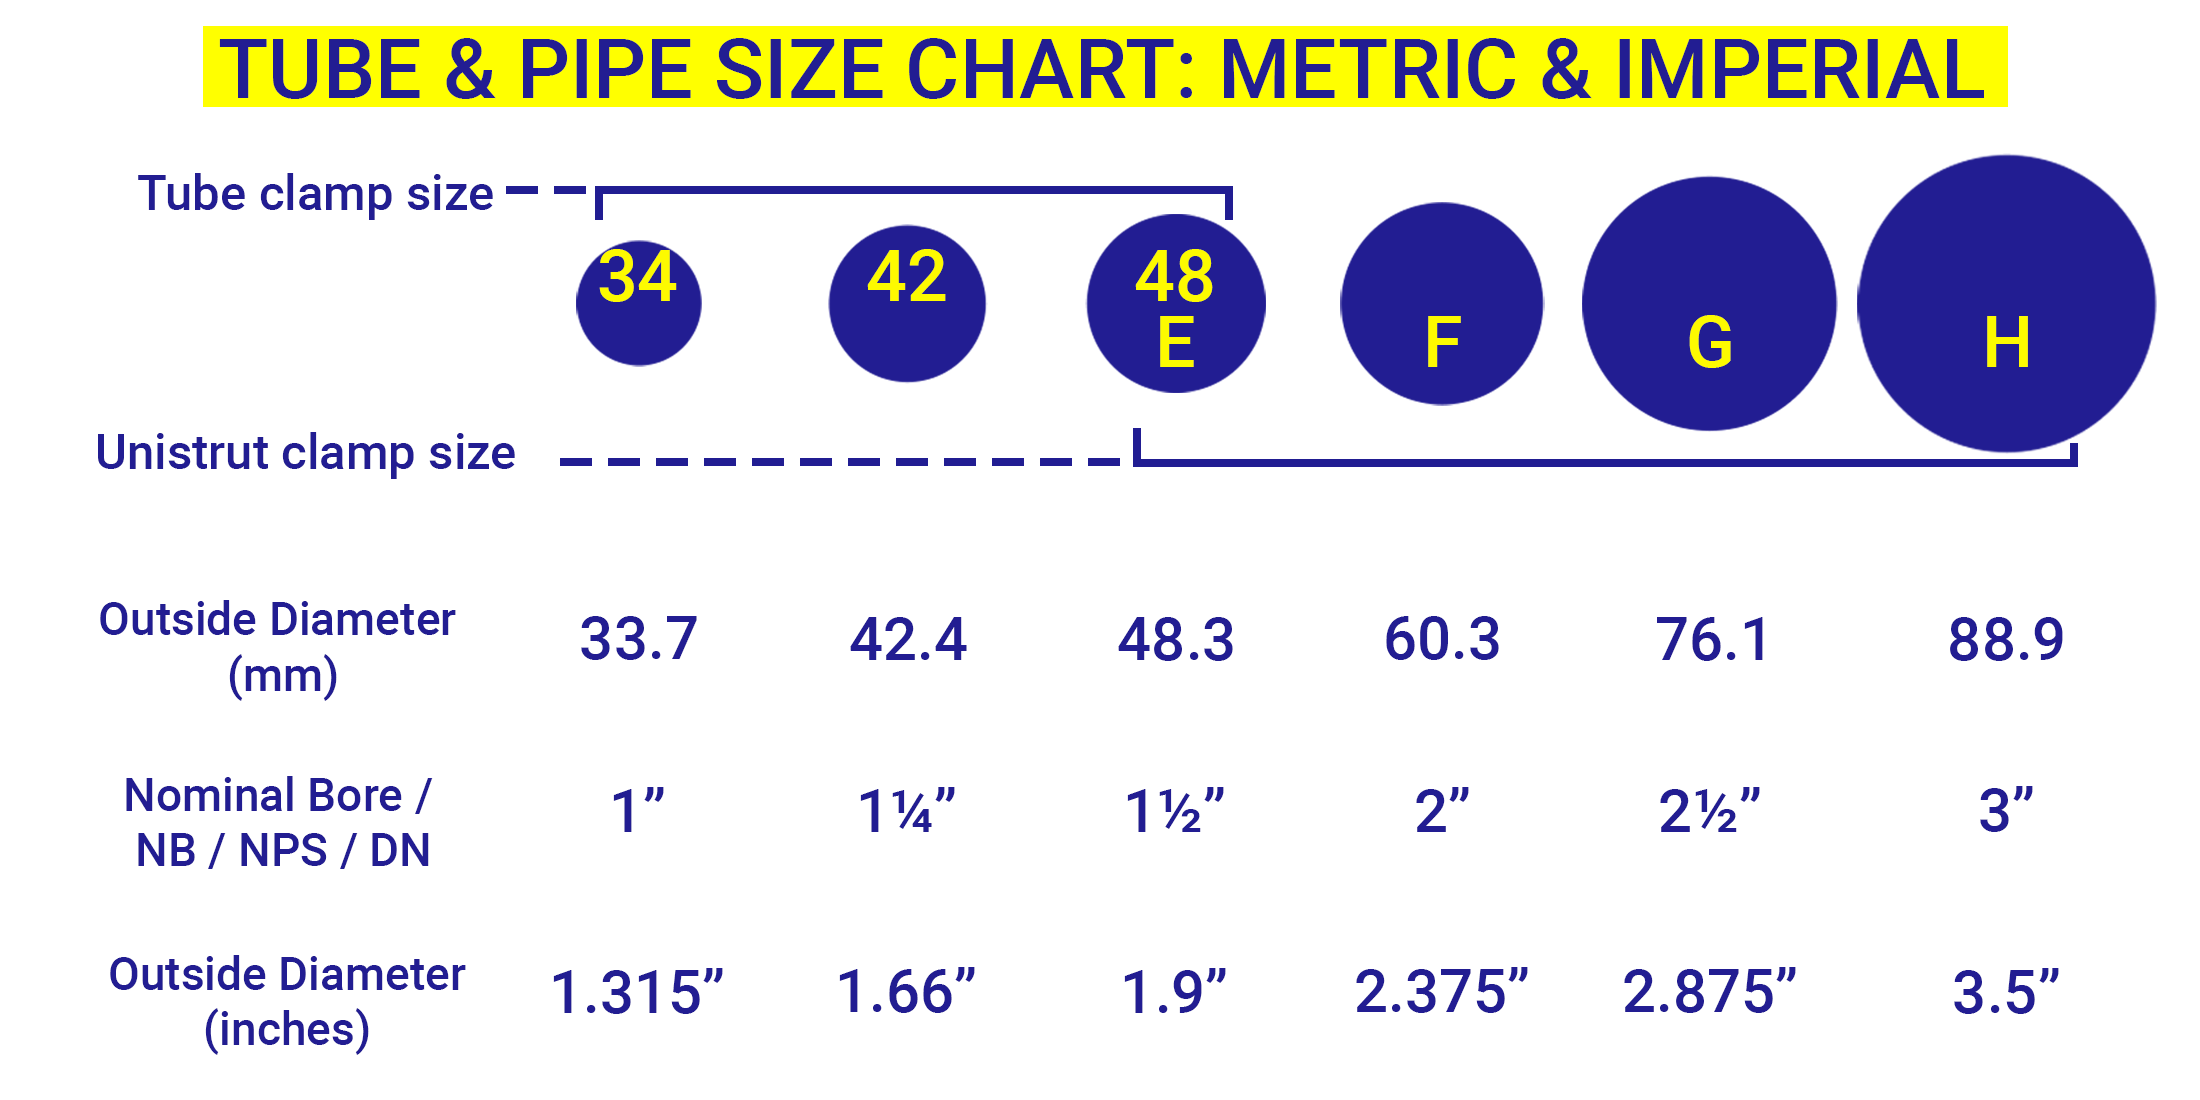 Tube and pipe chart metric and imperial